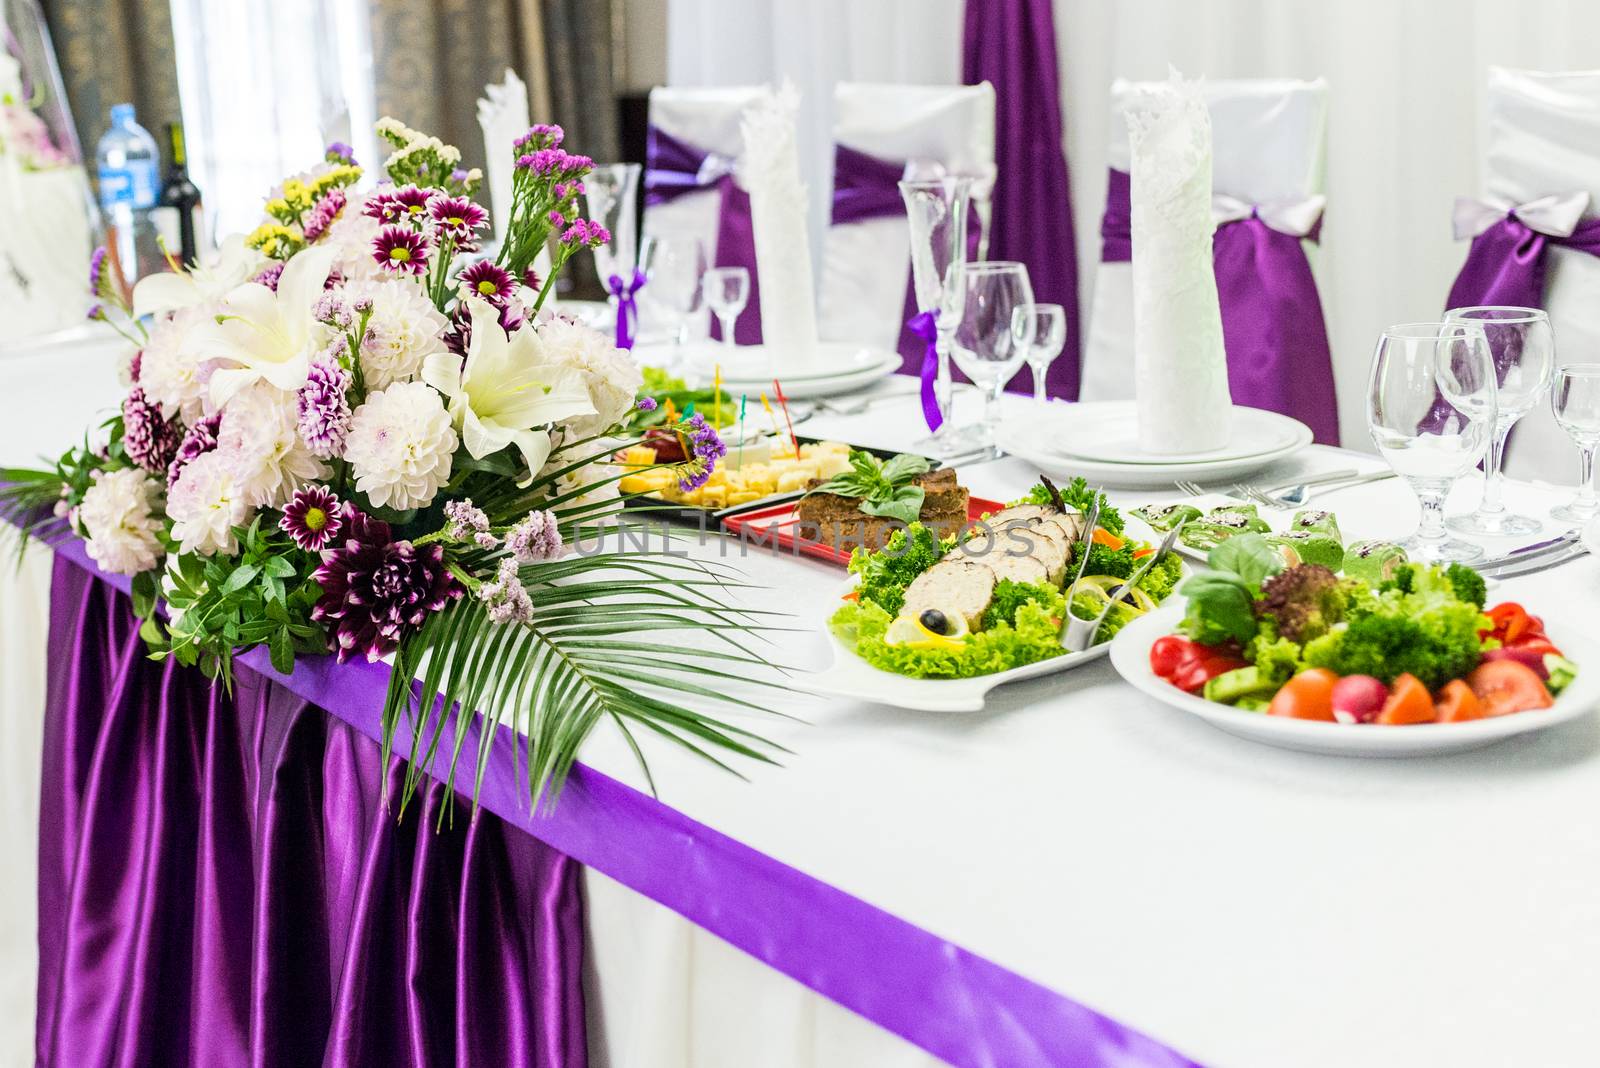 food table decorated with purple and white beautifu flowers for wedding